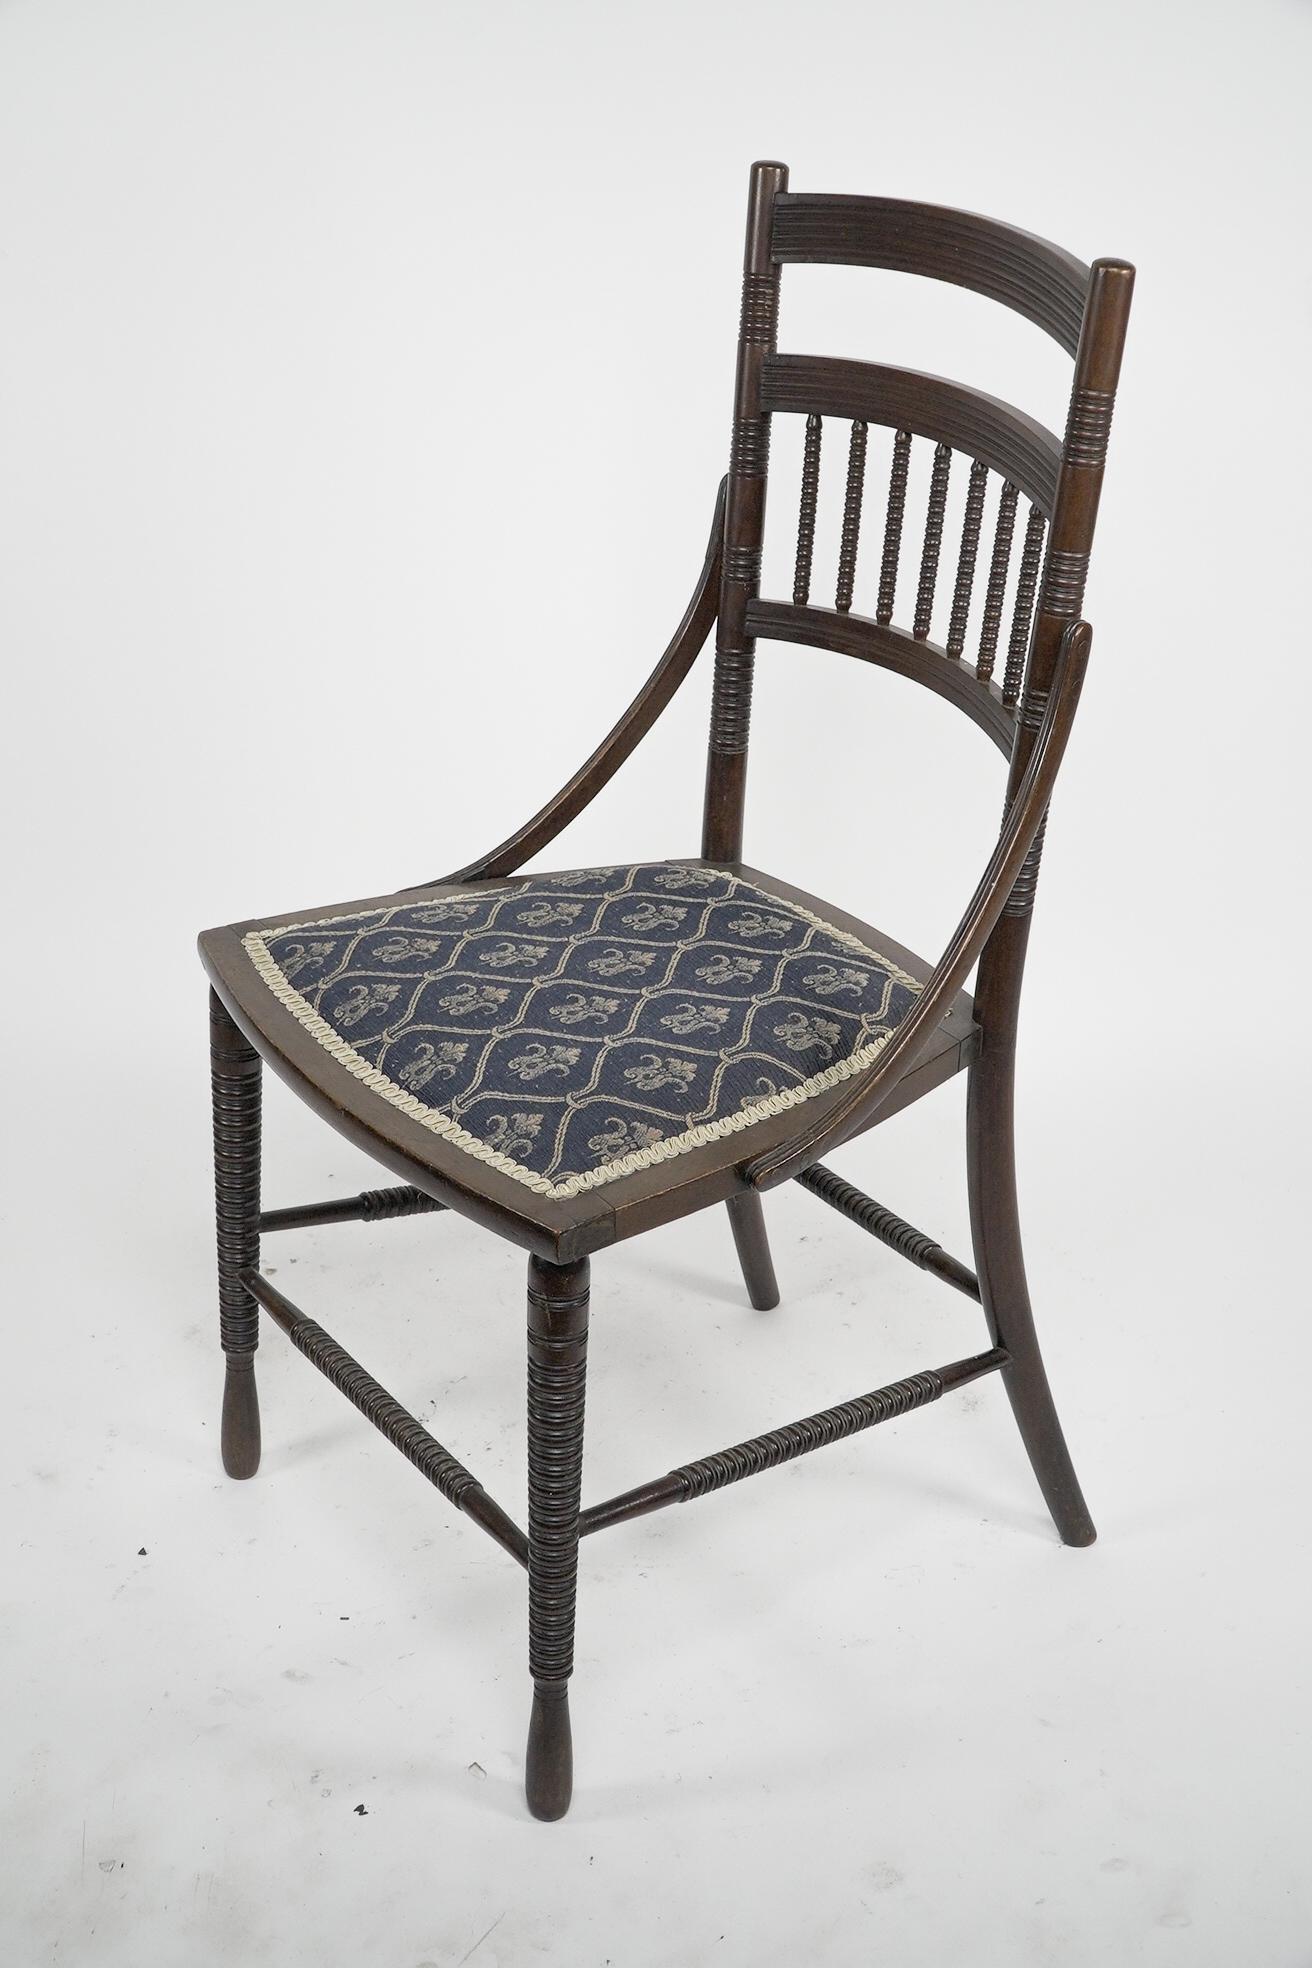 R. W. Edis, probably made by Jackson & Graham A fine pair of Walnut side chairs For Sale 2